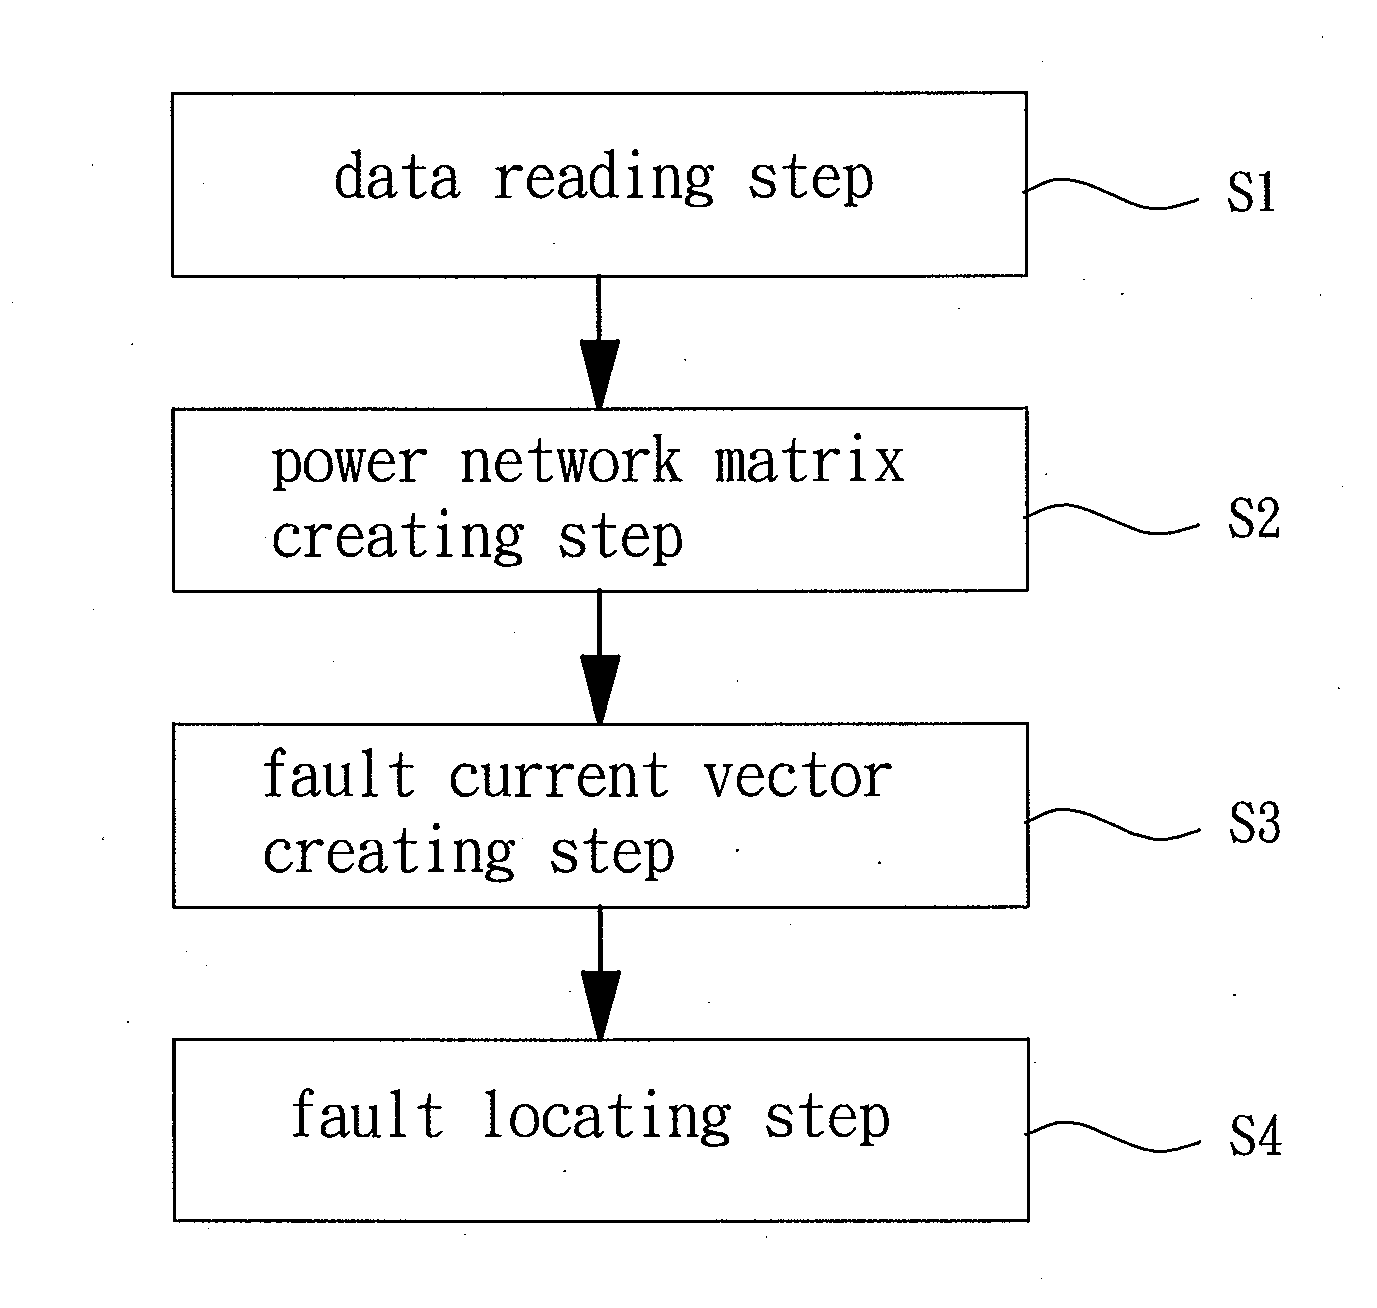 Method for locating faults in a power network having fault indicators